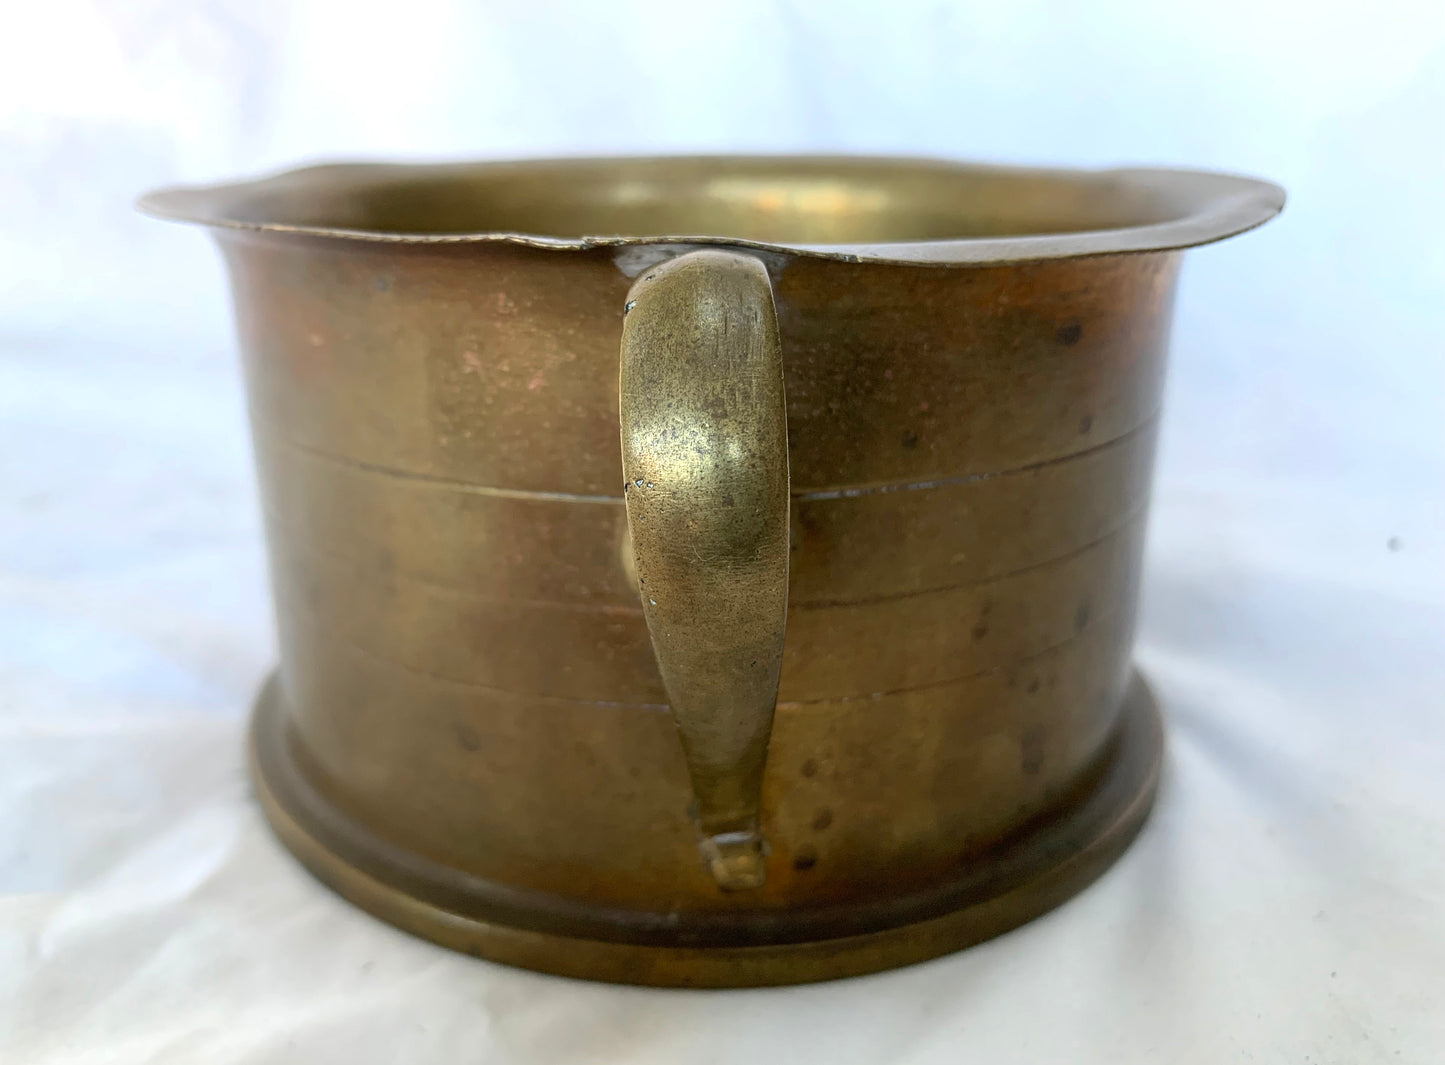 WW1 Trench Art Candle Holder made from a British 4.5 inch Shell Case. Dated 1916.